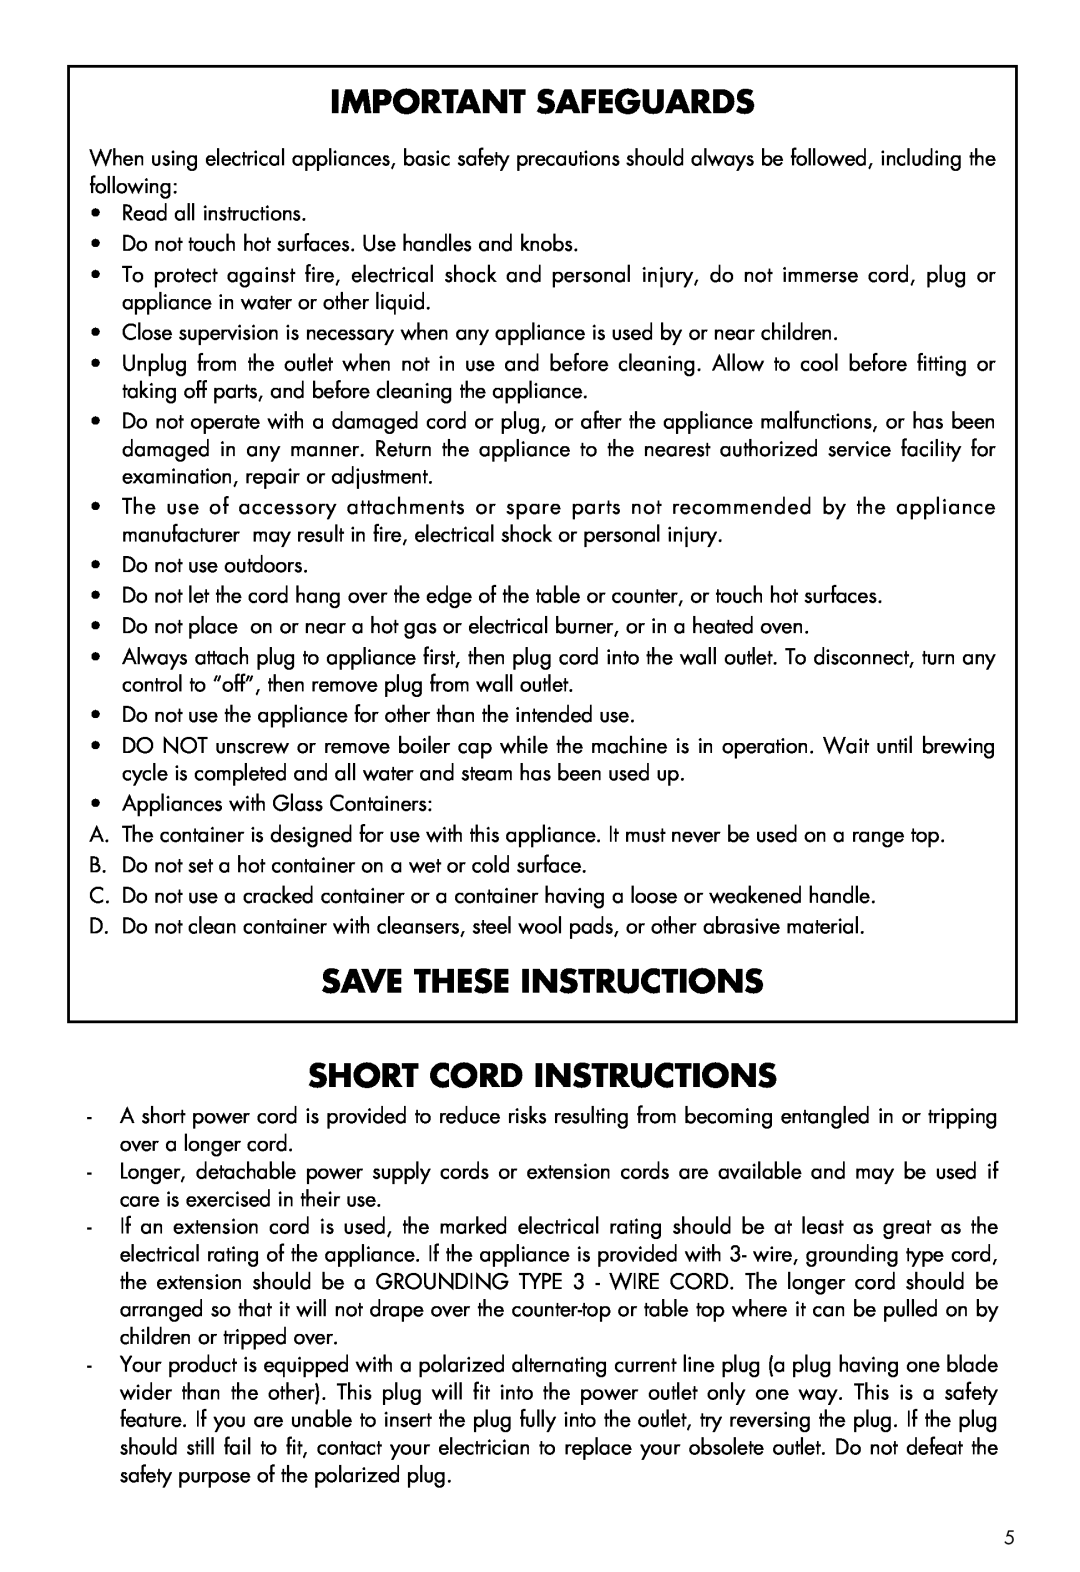 DeLonghi BCO60 manual Important Safeguards, Save These Instructions Short Cord Instructions 